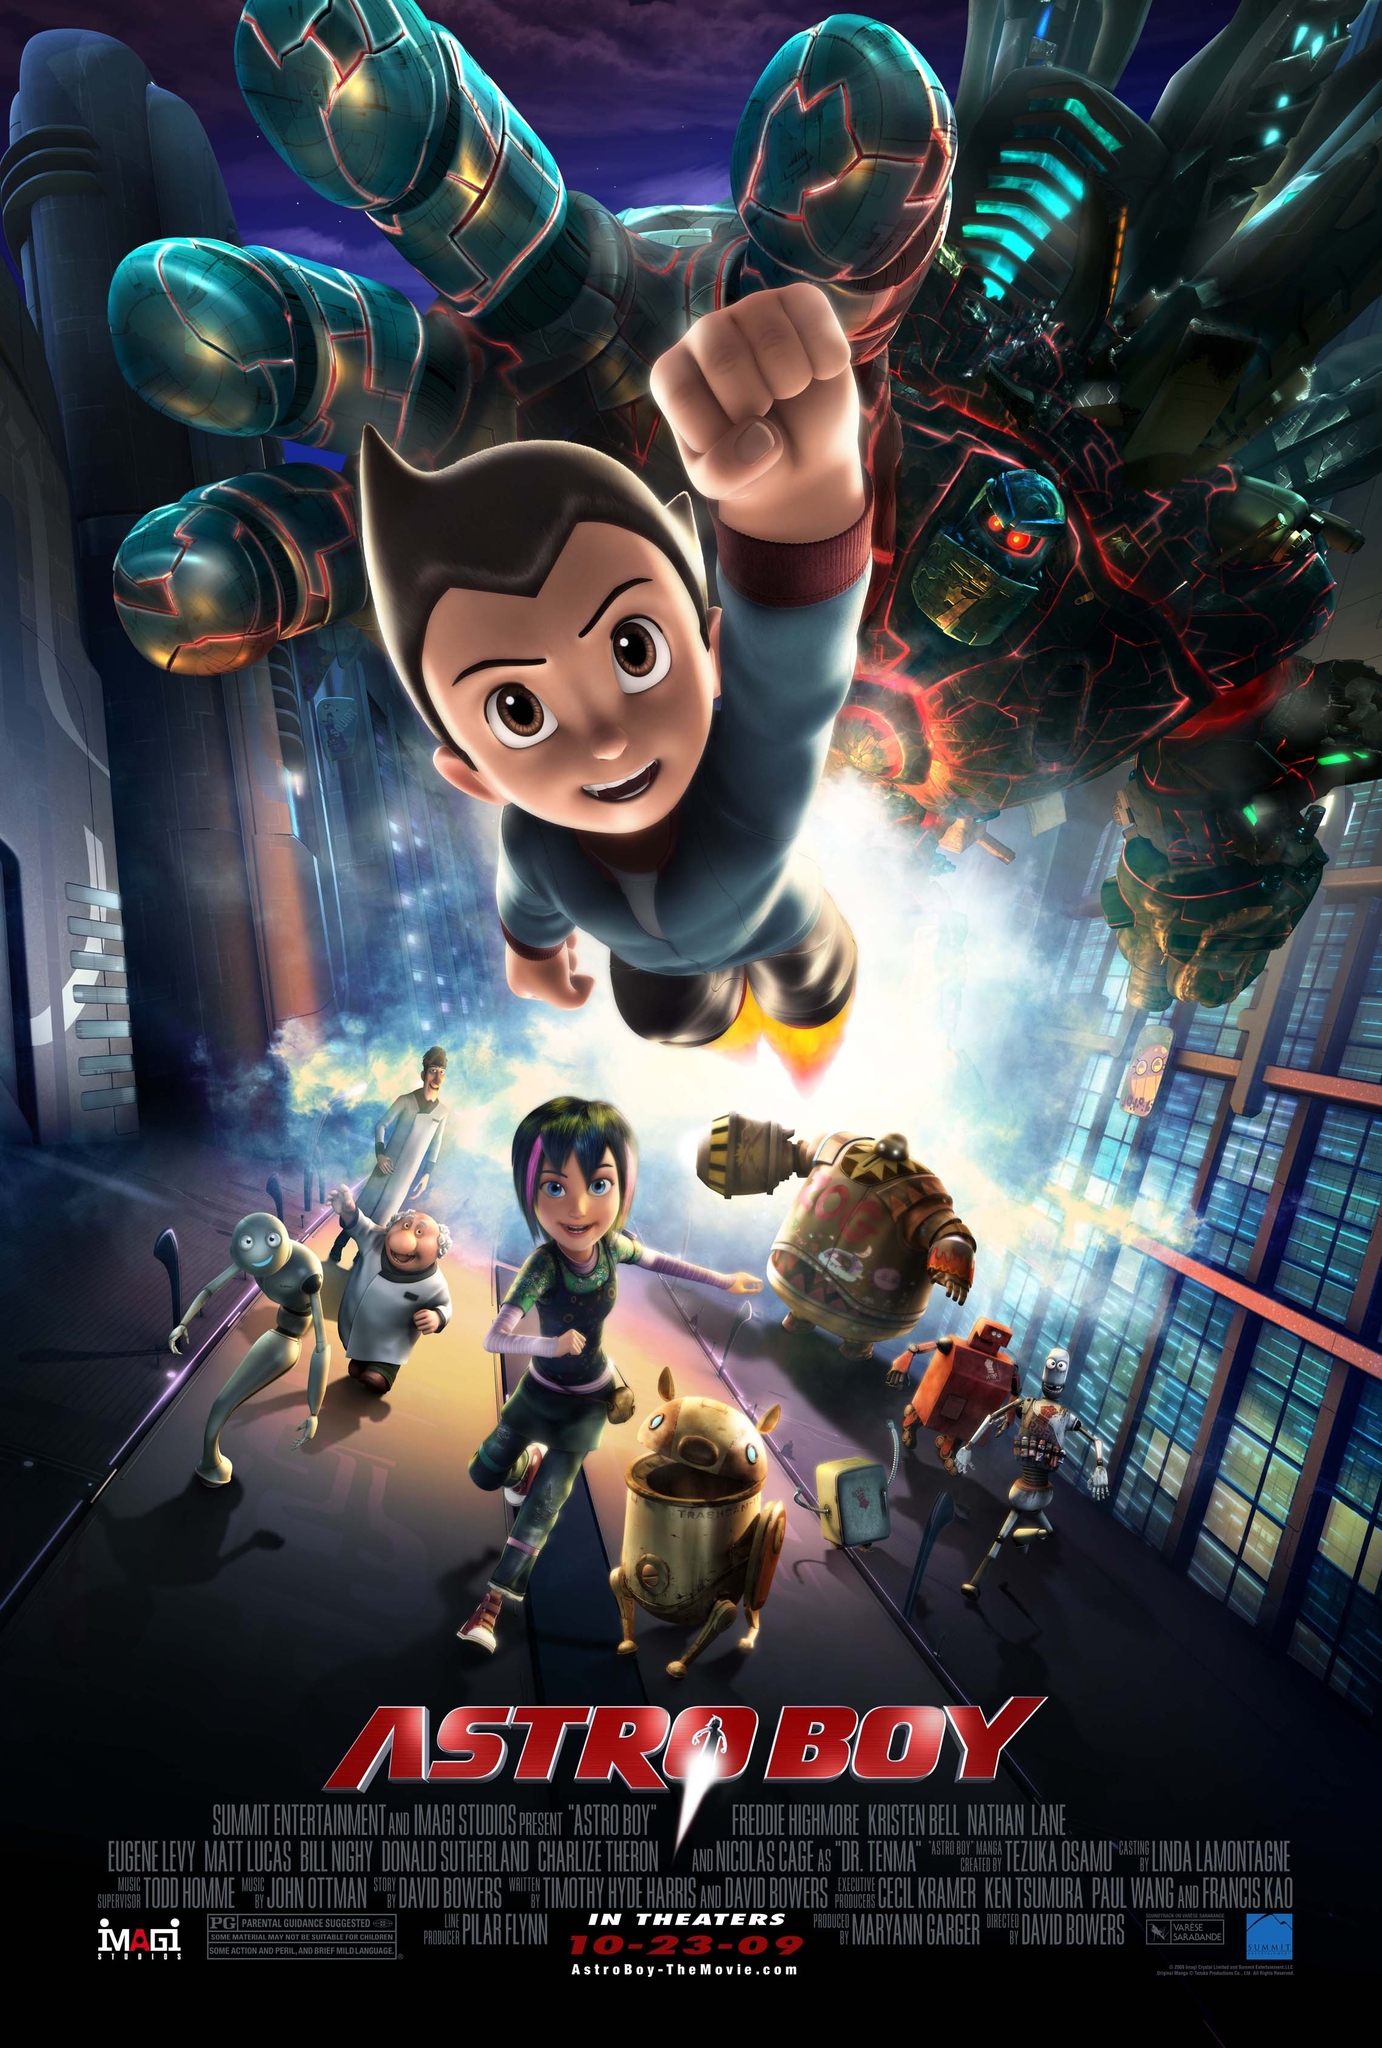 Astro Boy (film) (V2) | The JH Movie Collection's Official Wiki 